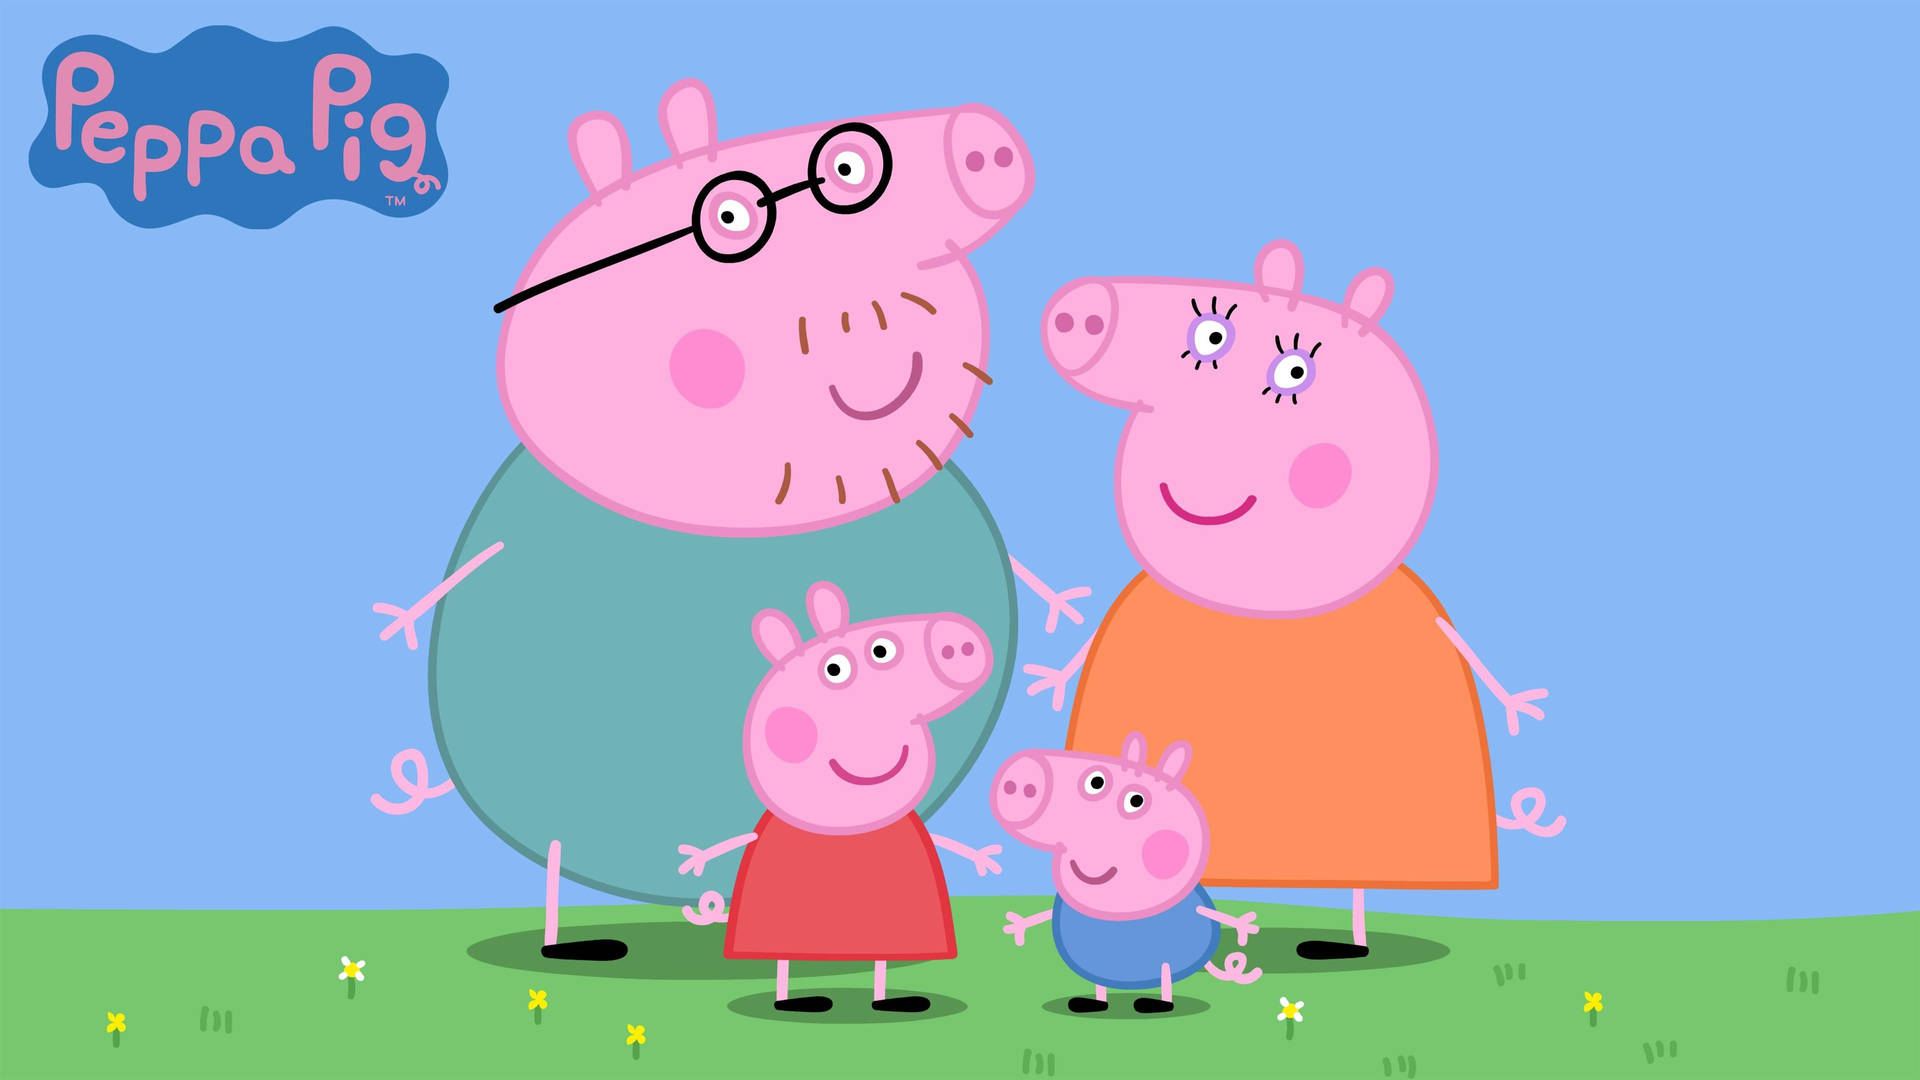 Happy Peppa Pig Family Poster wallpaper.